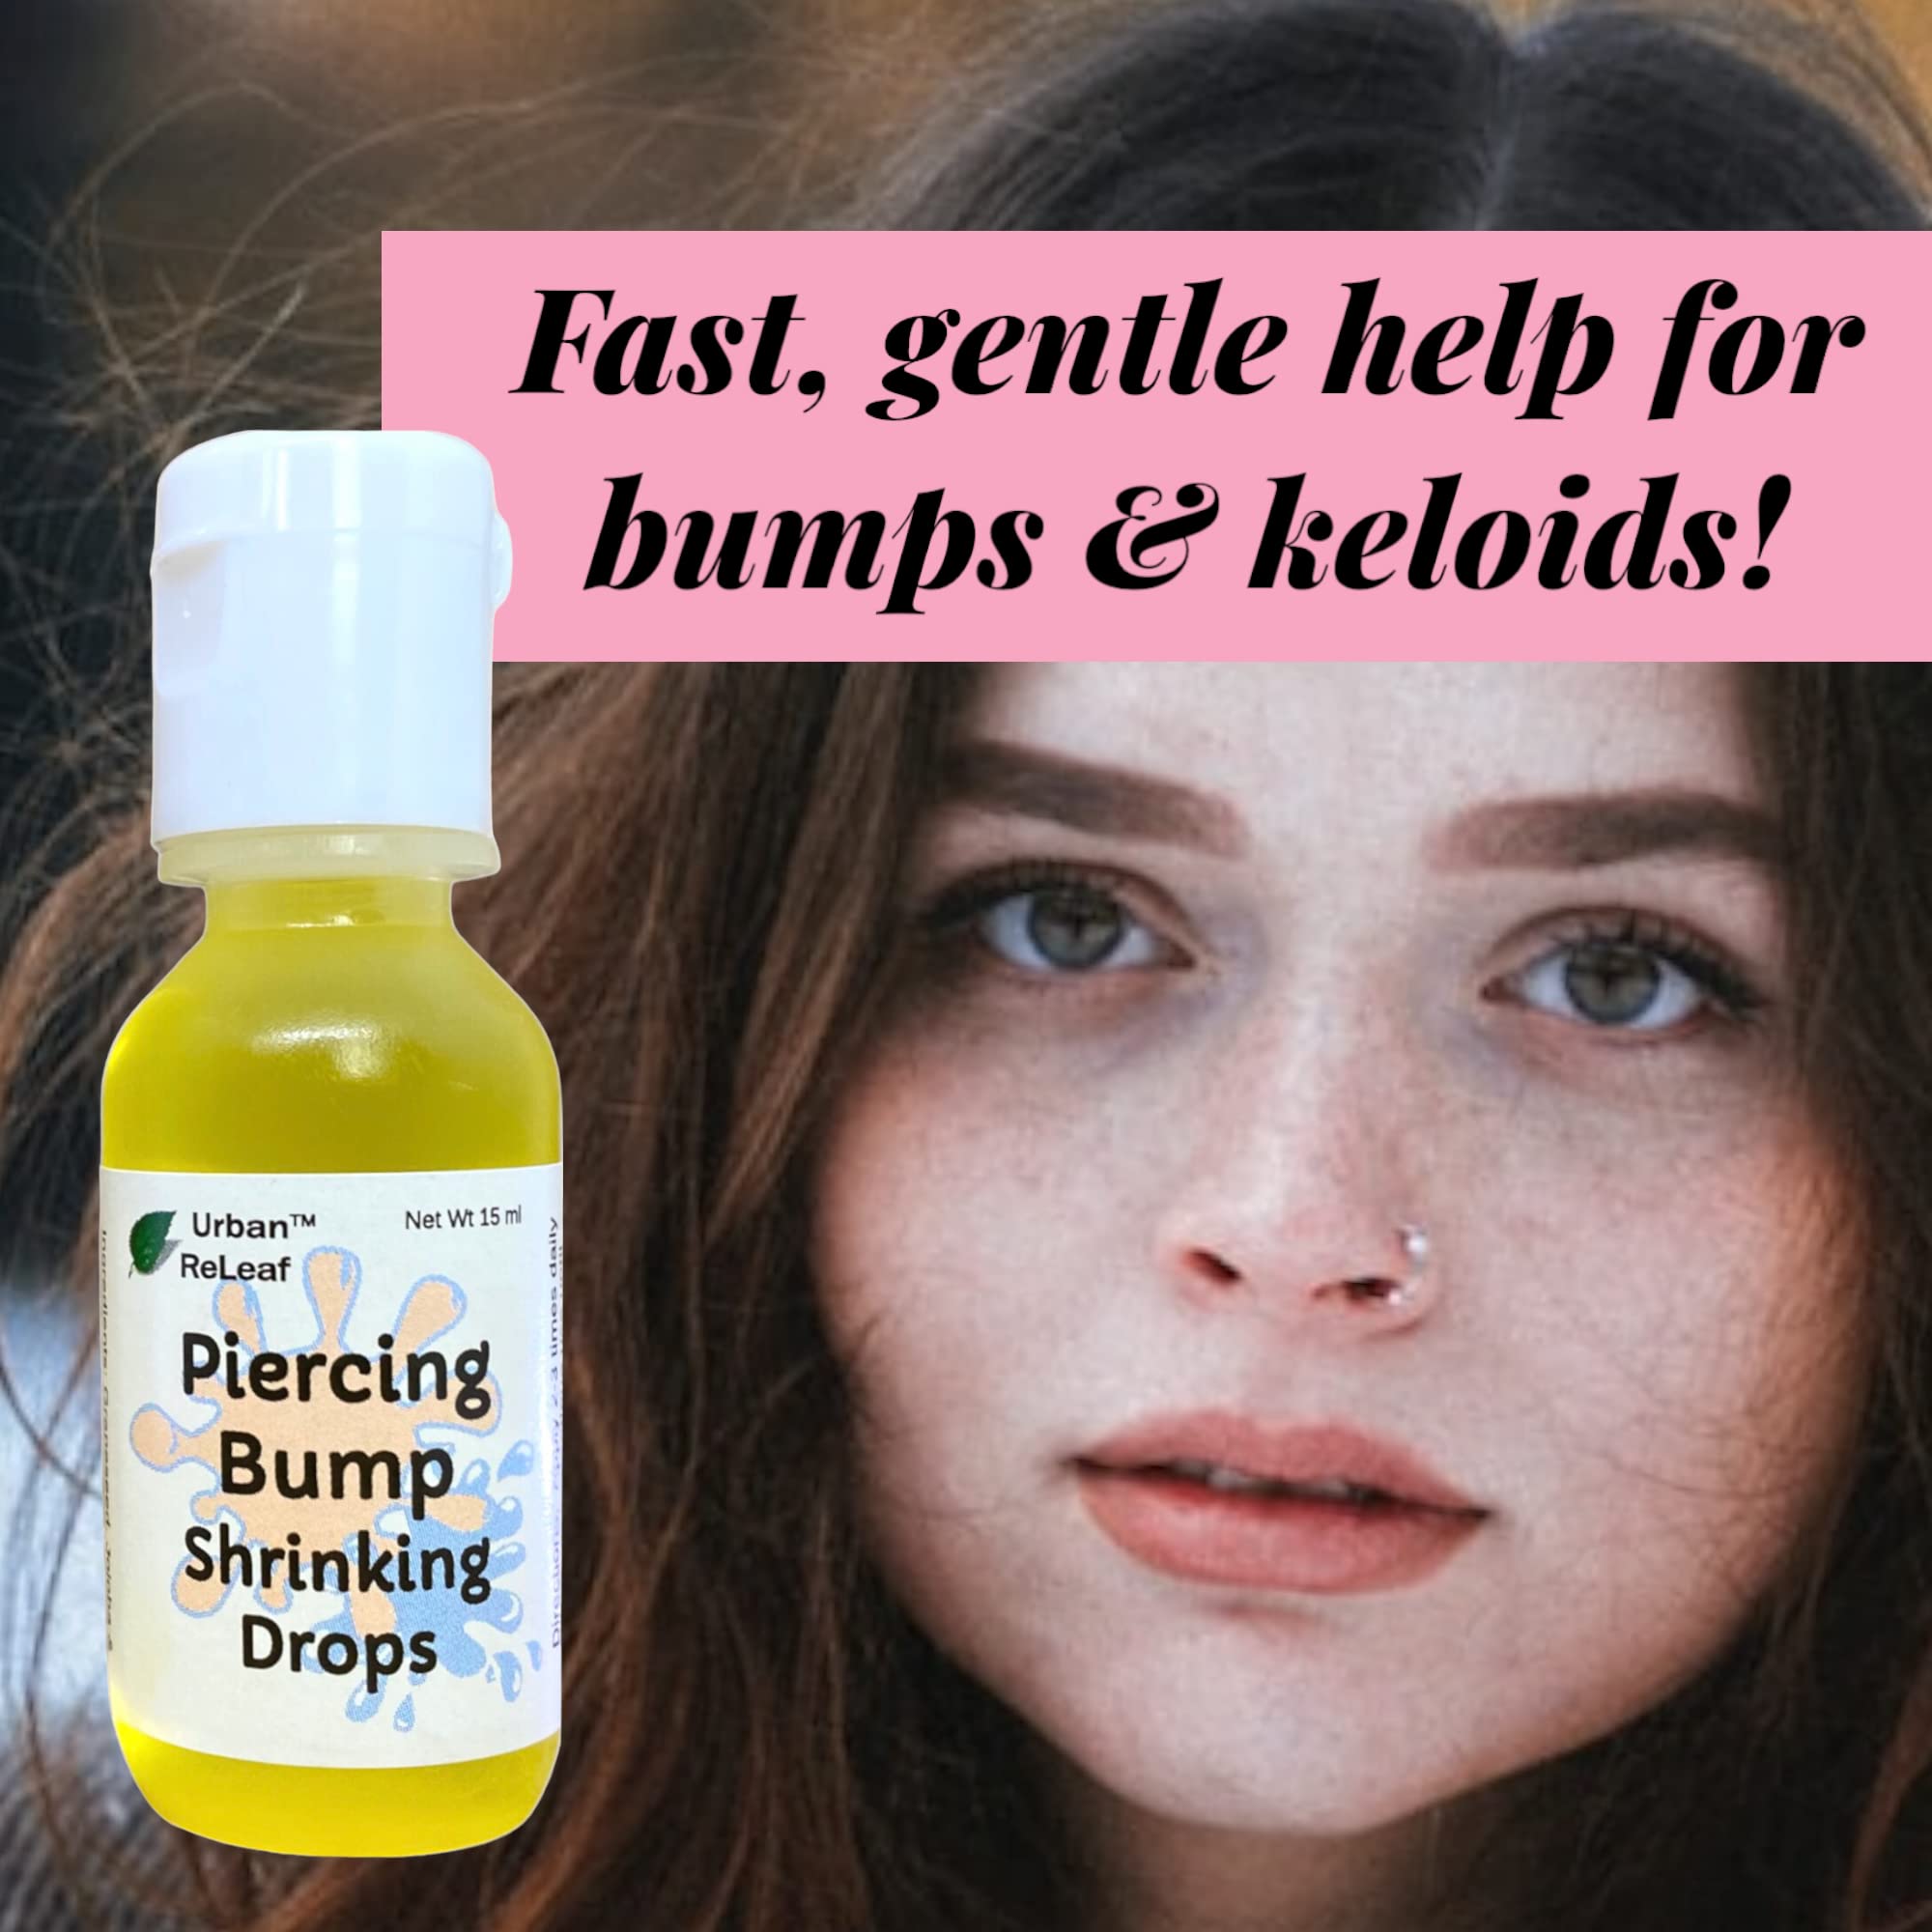 Urban ReLeaf Piercing Bump Shrinking Drops! Keloid Bumps Gentle Effective Aftercare Solution. Natural Essential Oils. Fast Removal Help for Scars Nodules Cartilage Nose Ear Spots. Clean Soothe